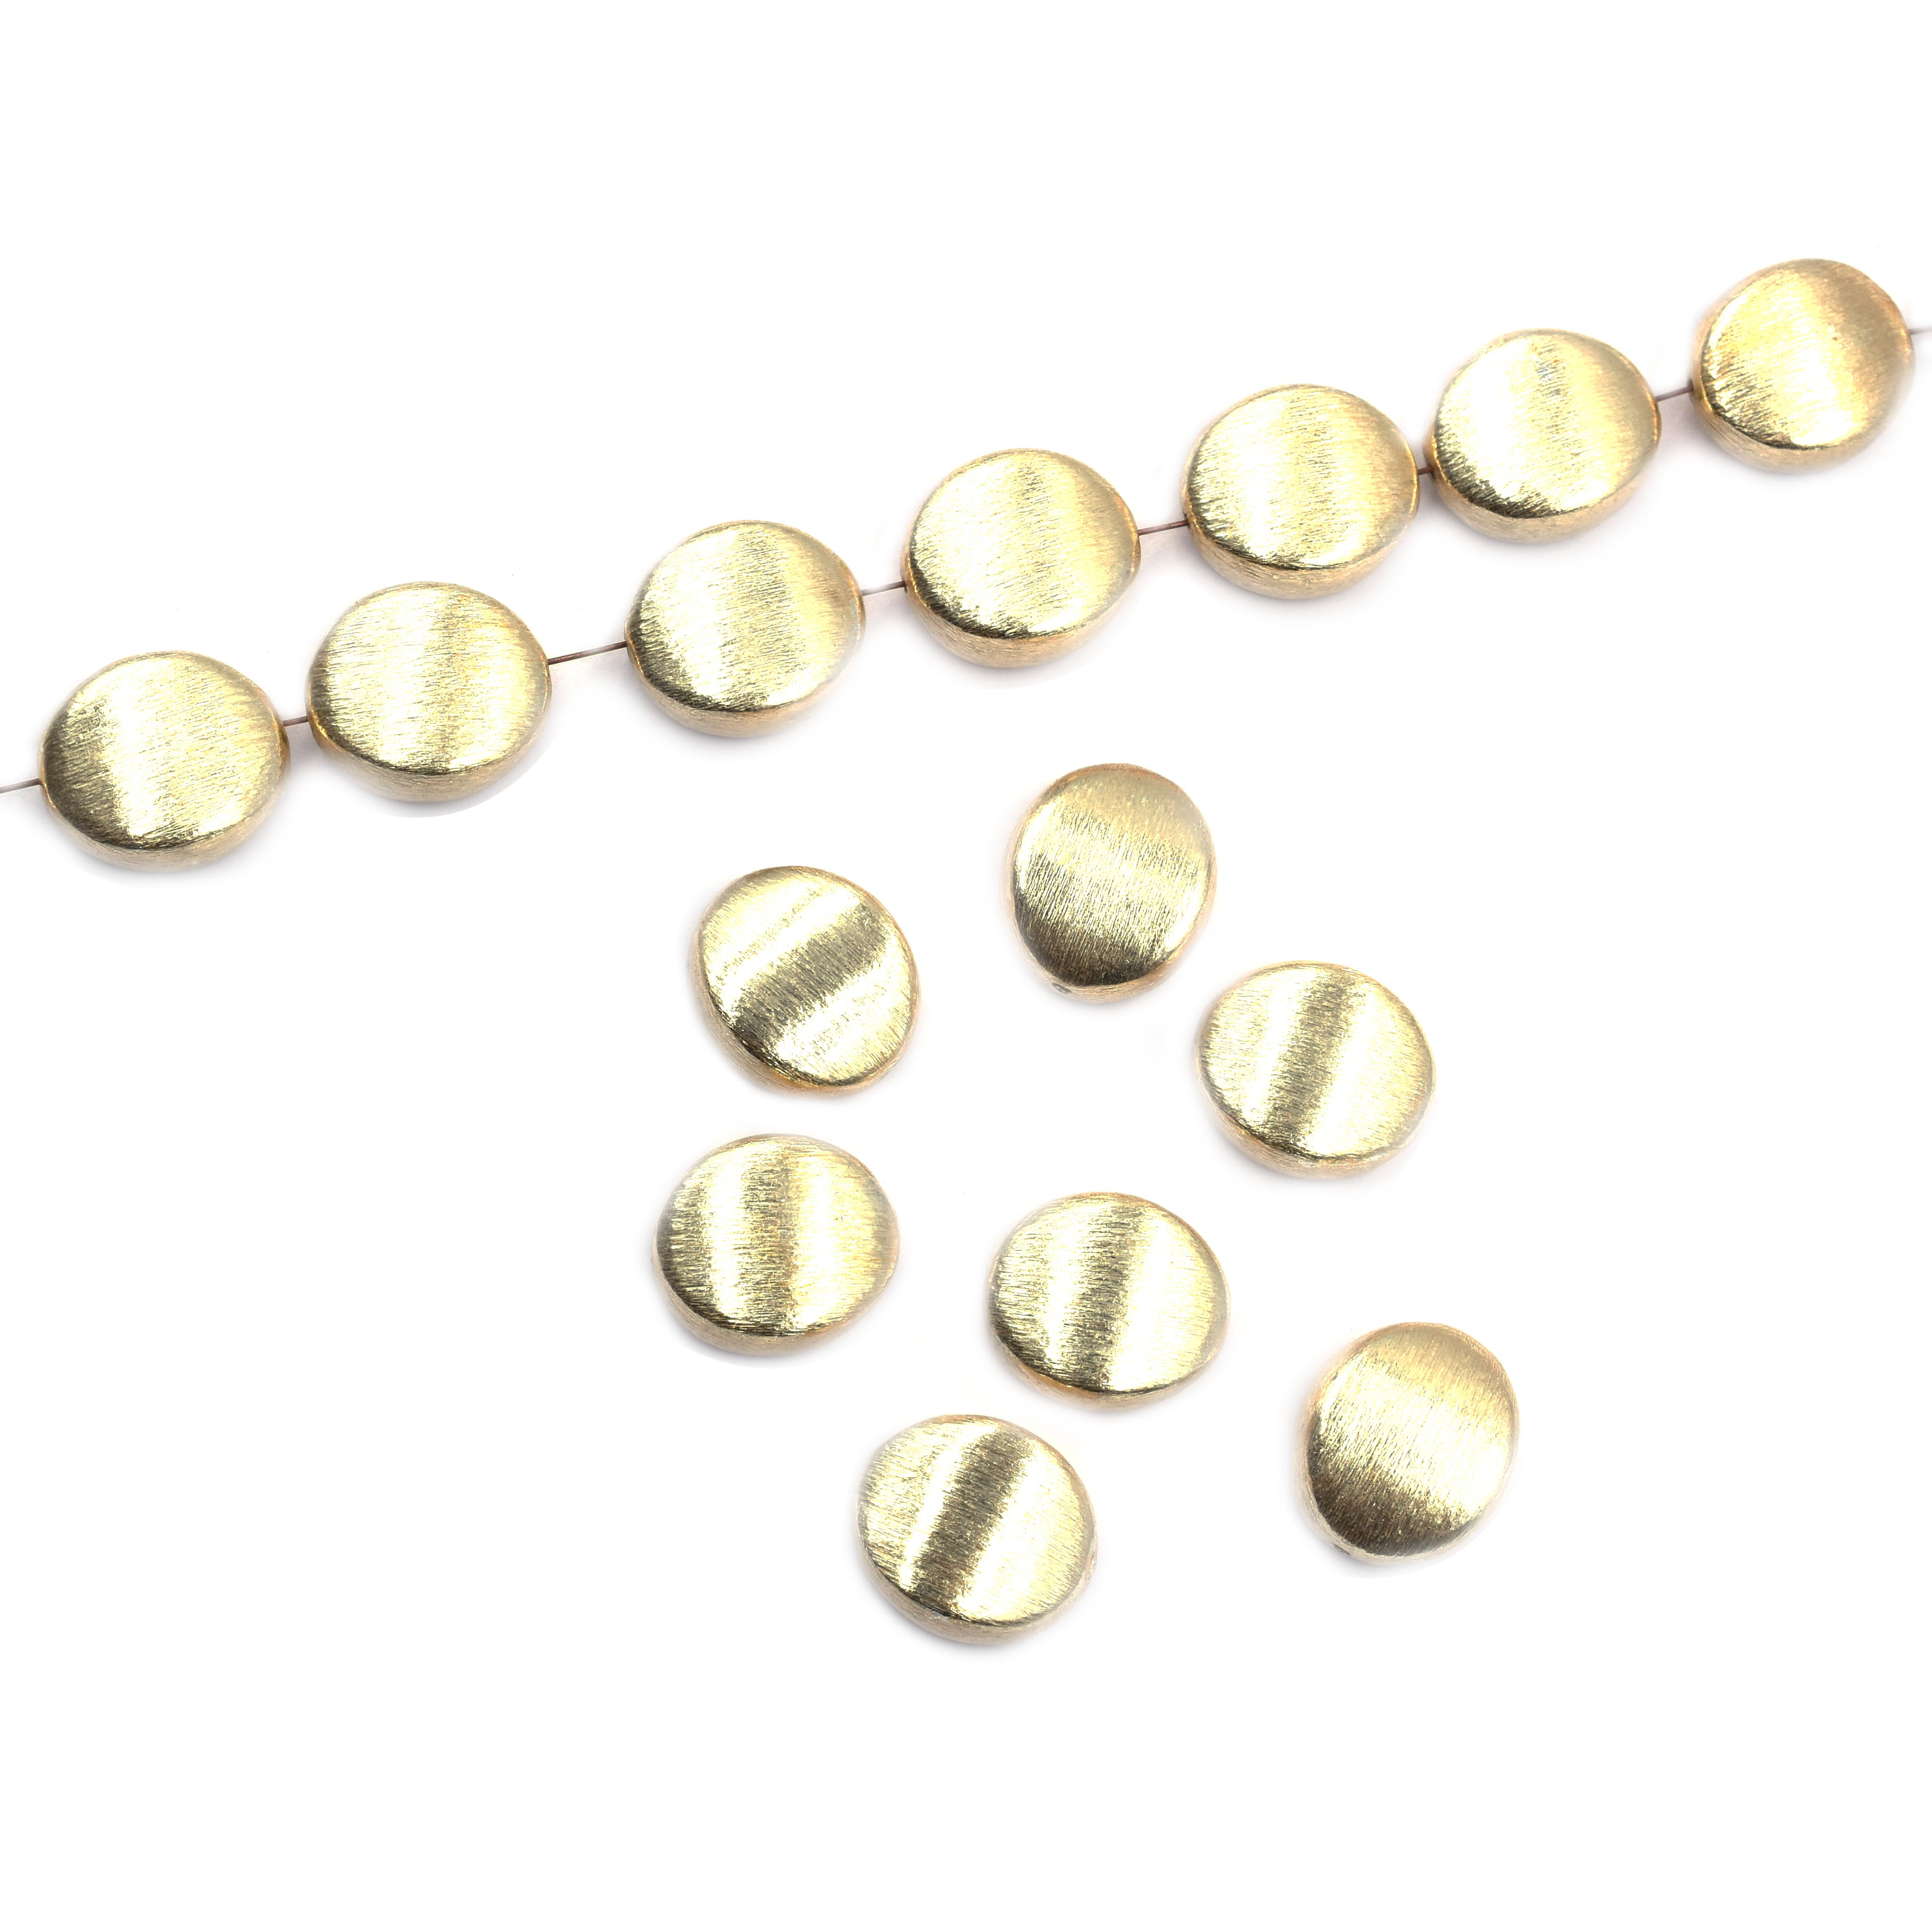 10 Pcs 16mm Oval Brushed Matte Finish Beads Gold Plated Copper